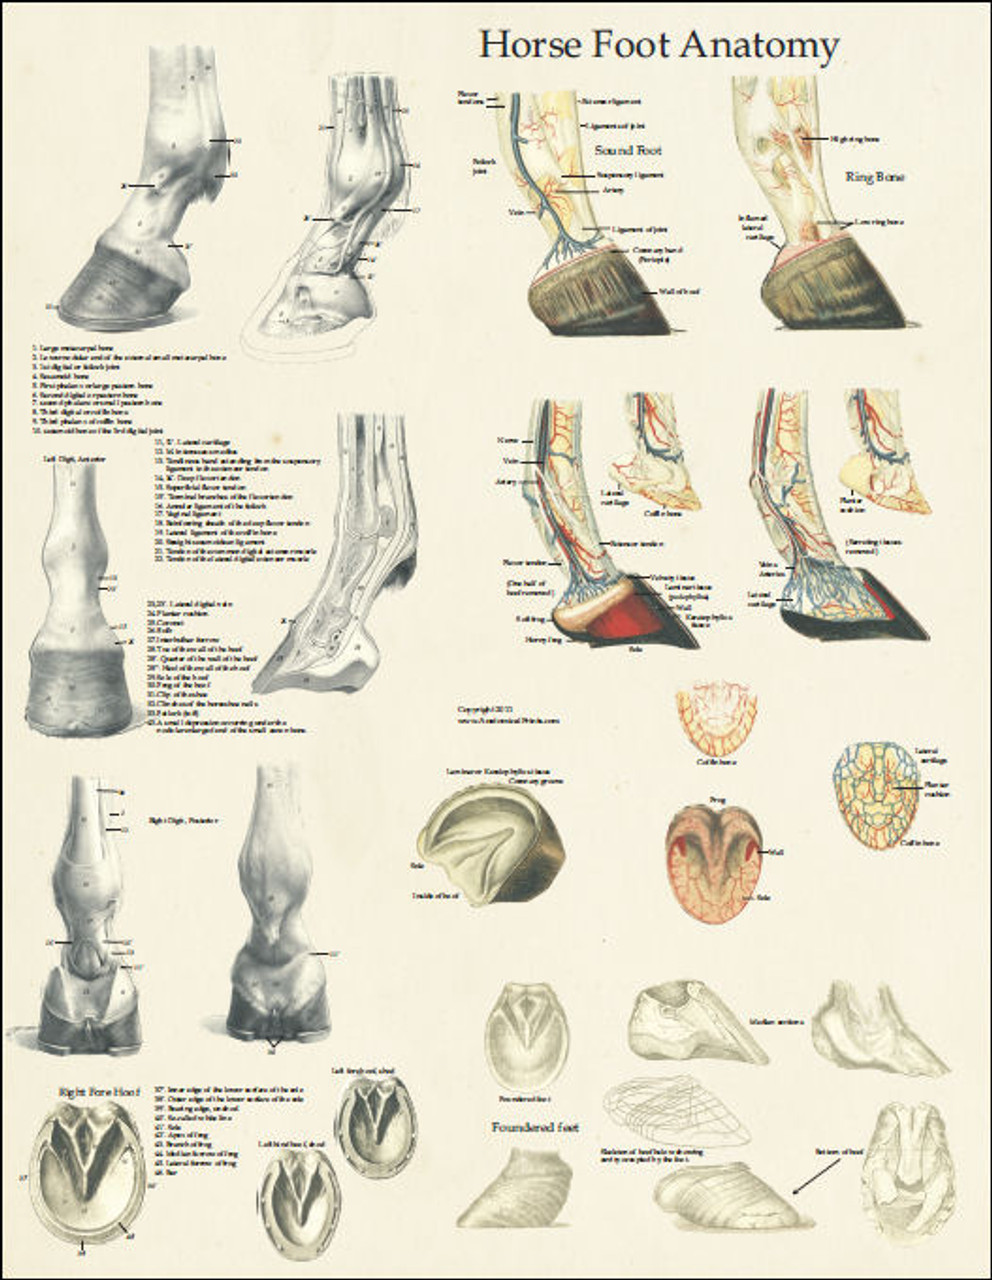 Equine Foot Anatomy Poster